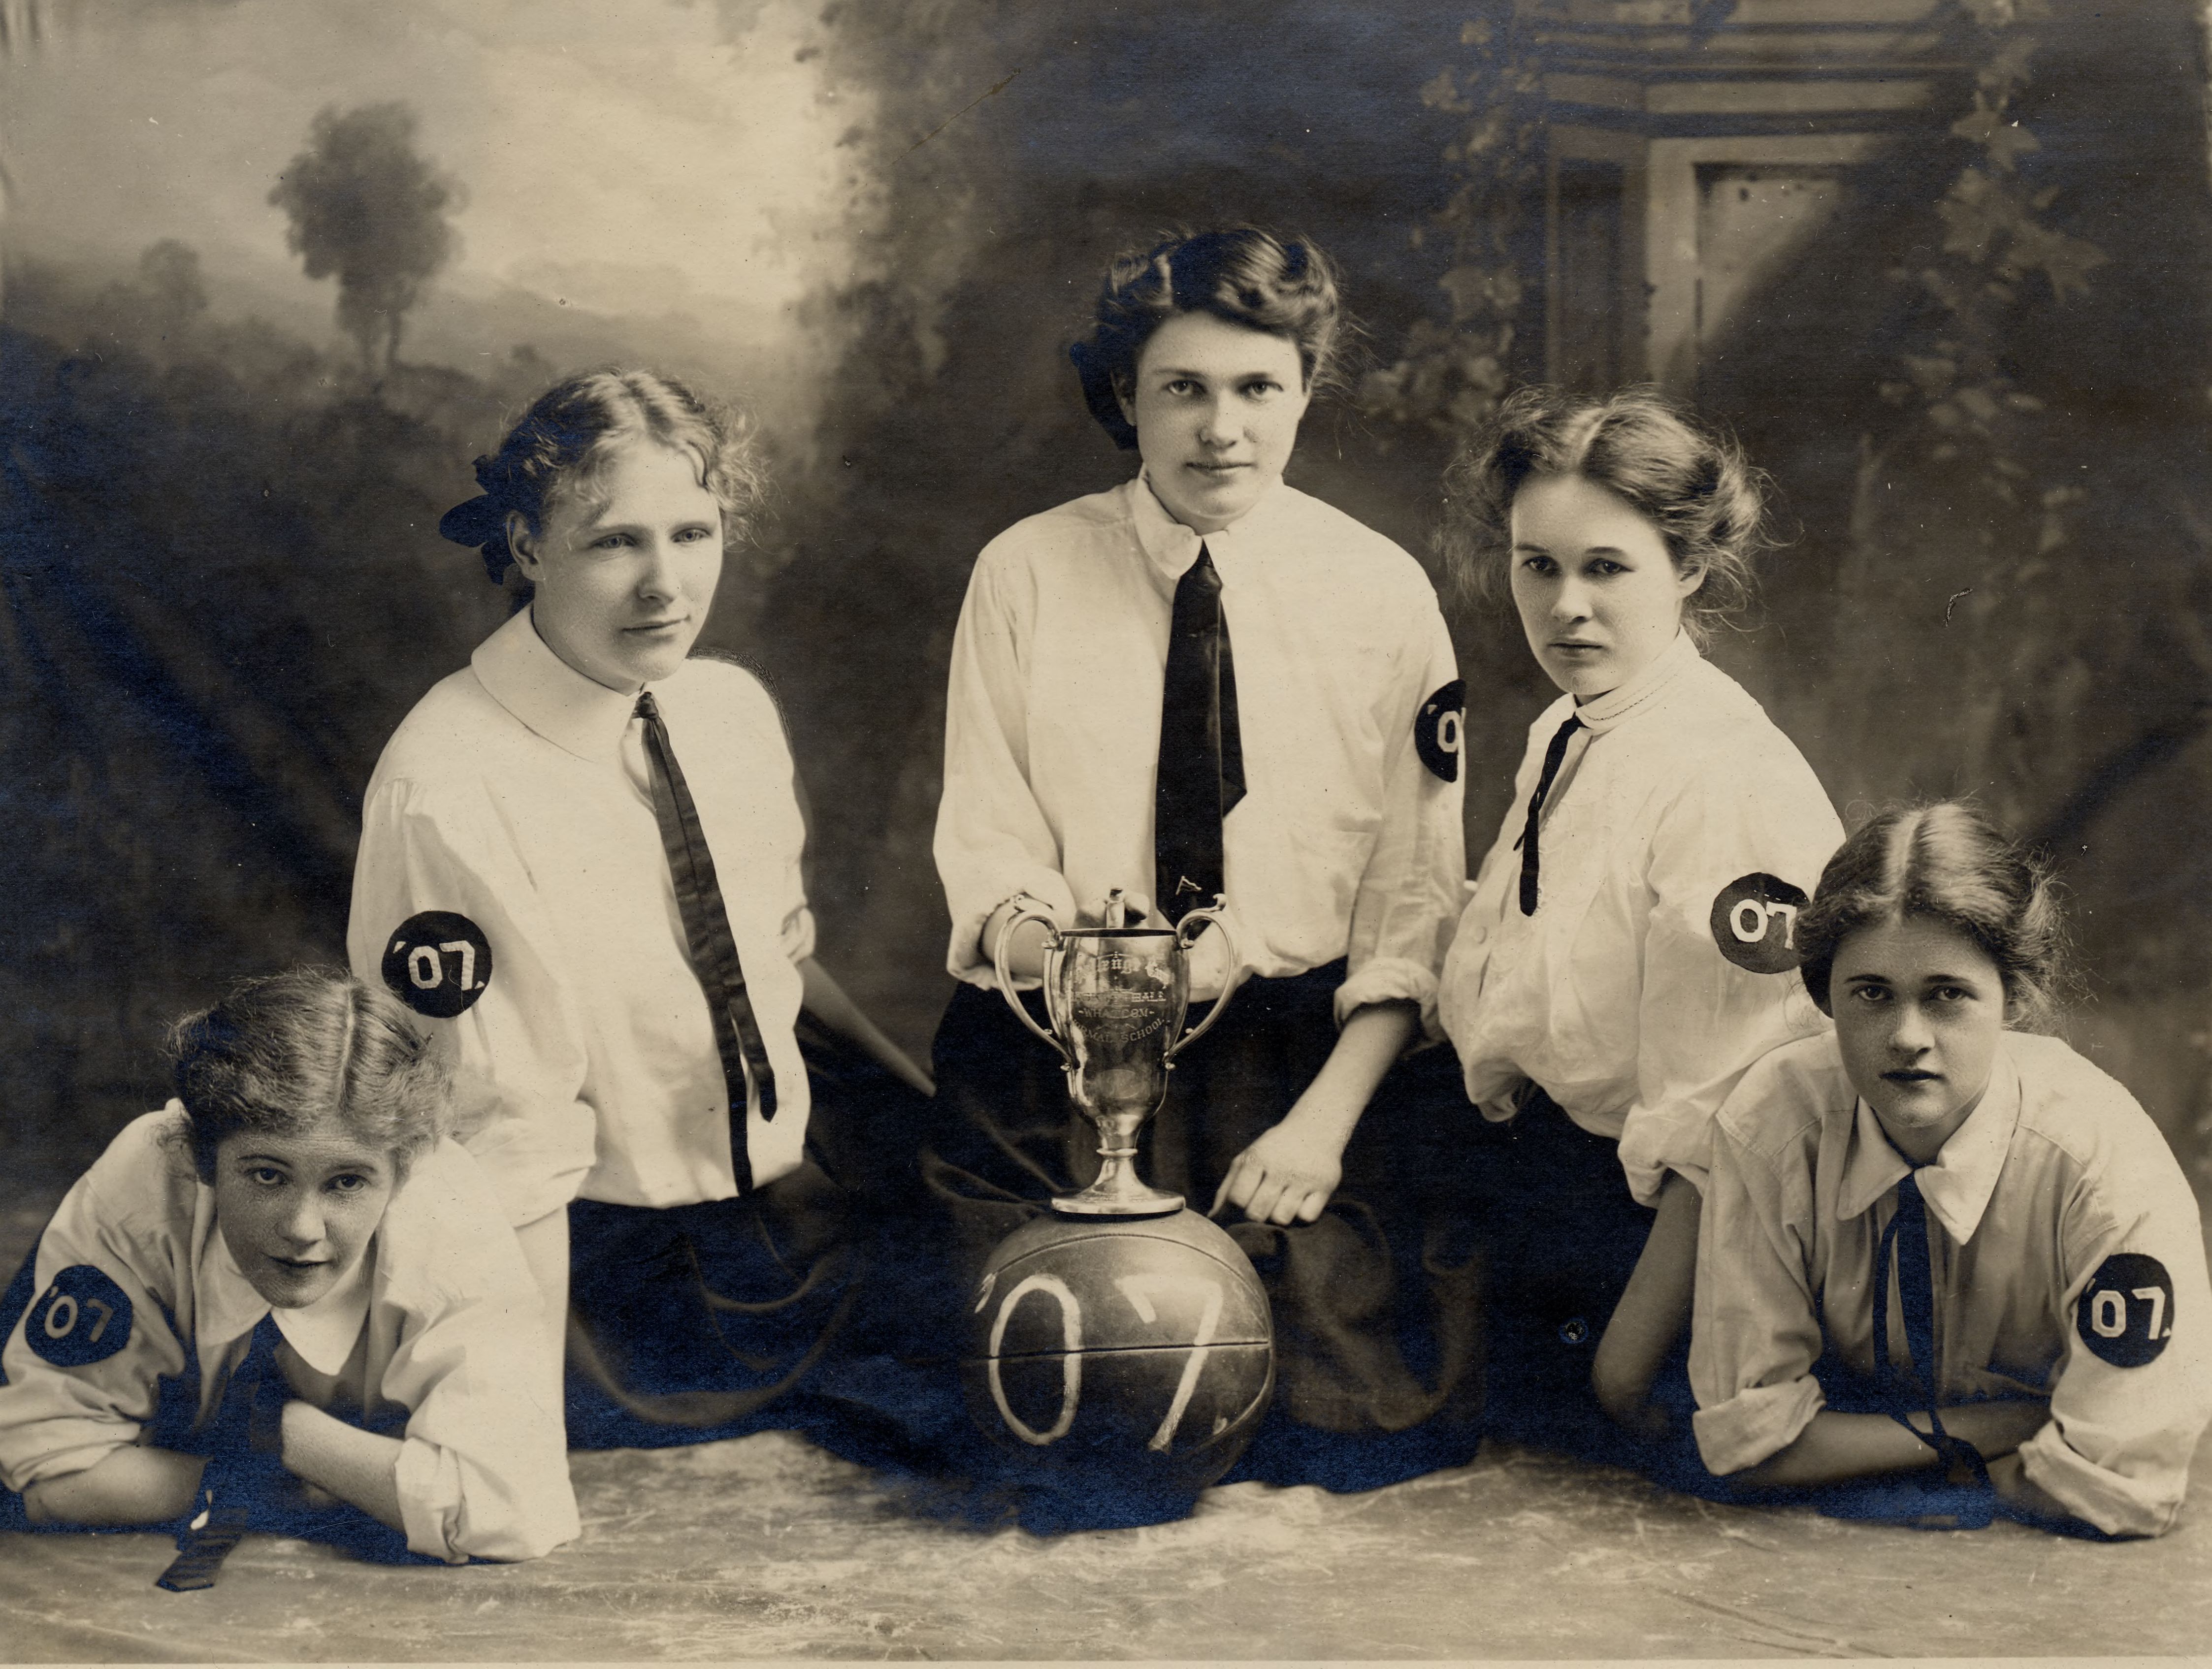 1906 women's basketball team portrait, displaying a gold trophy cup